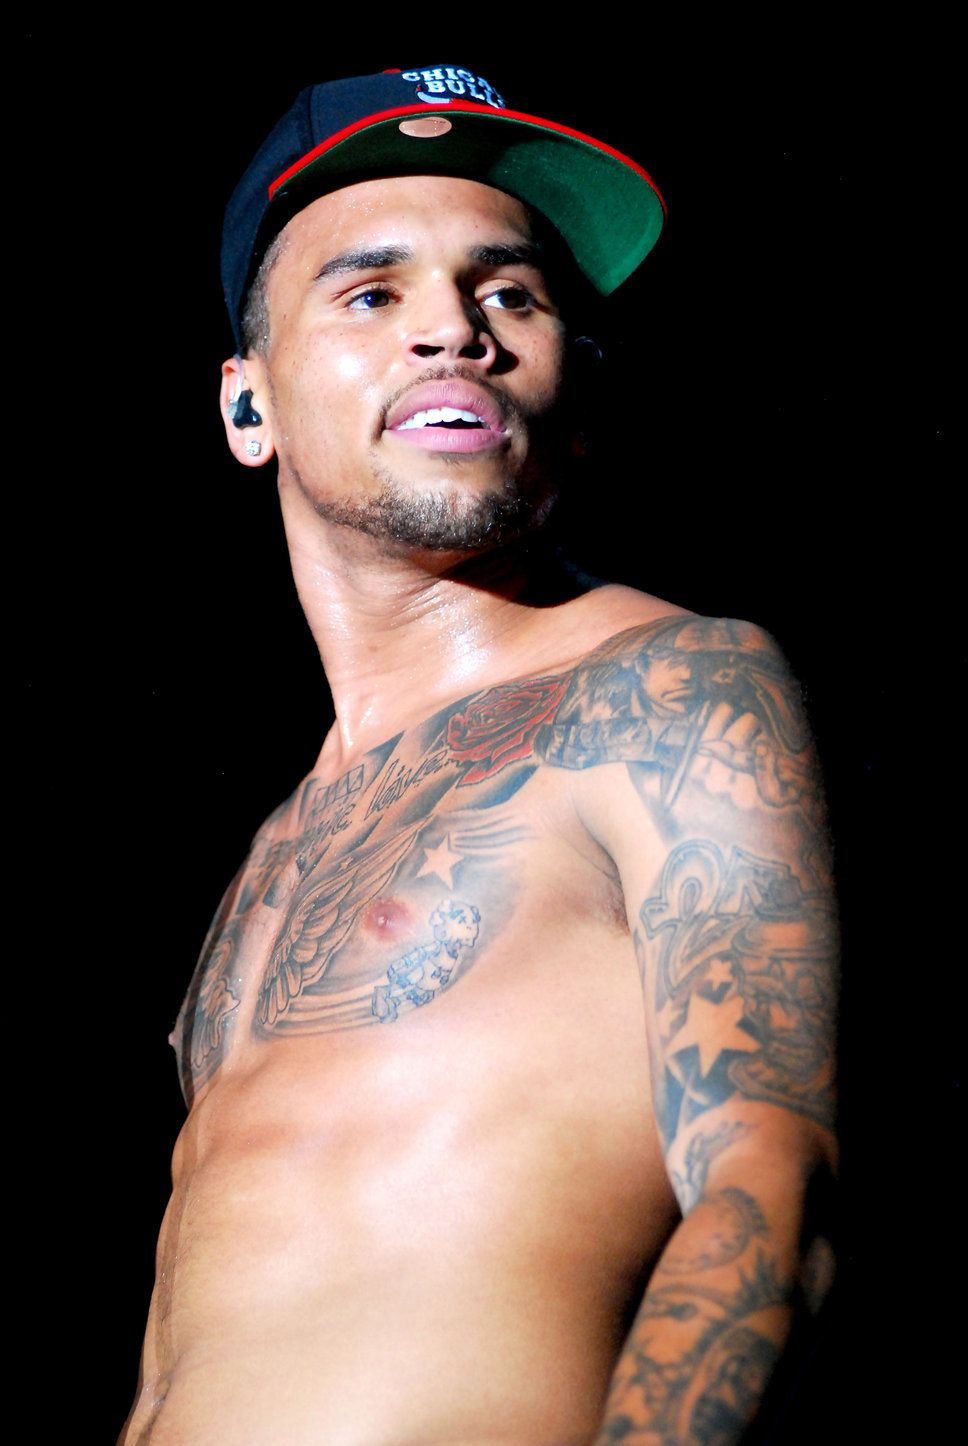 Chris Brown Bare Chest Tattoos Cap Beard Photo Posh24 Brown intended for sizing 968 X 1446